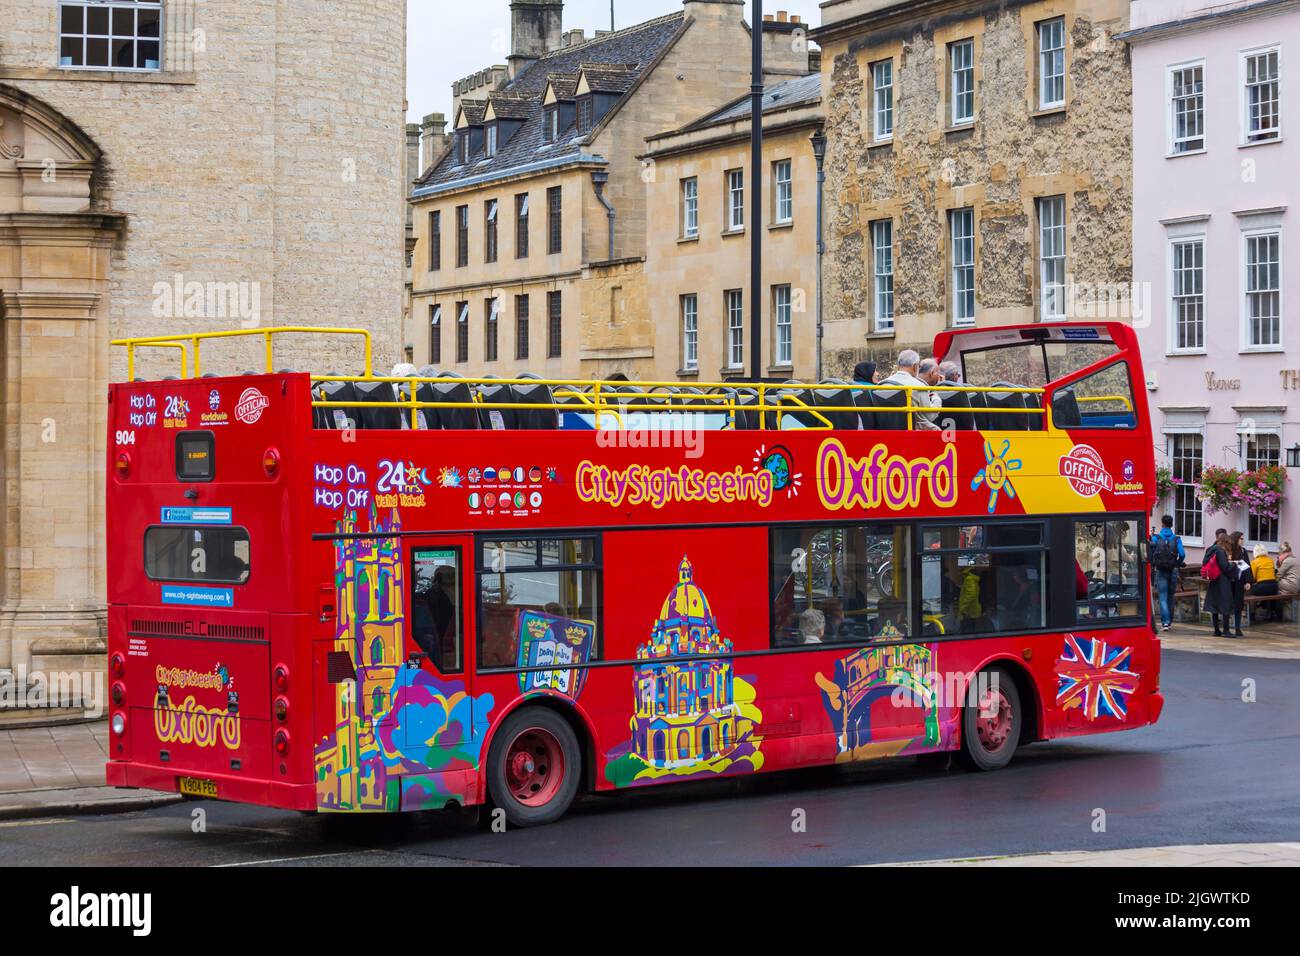 Oxford CitySightSeeing bus at Oxford, Oxfordshire UK on a wet rainy day in August - Oxford SightSeeing bus, open top bus Stock Photo